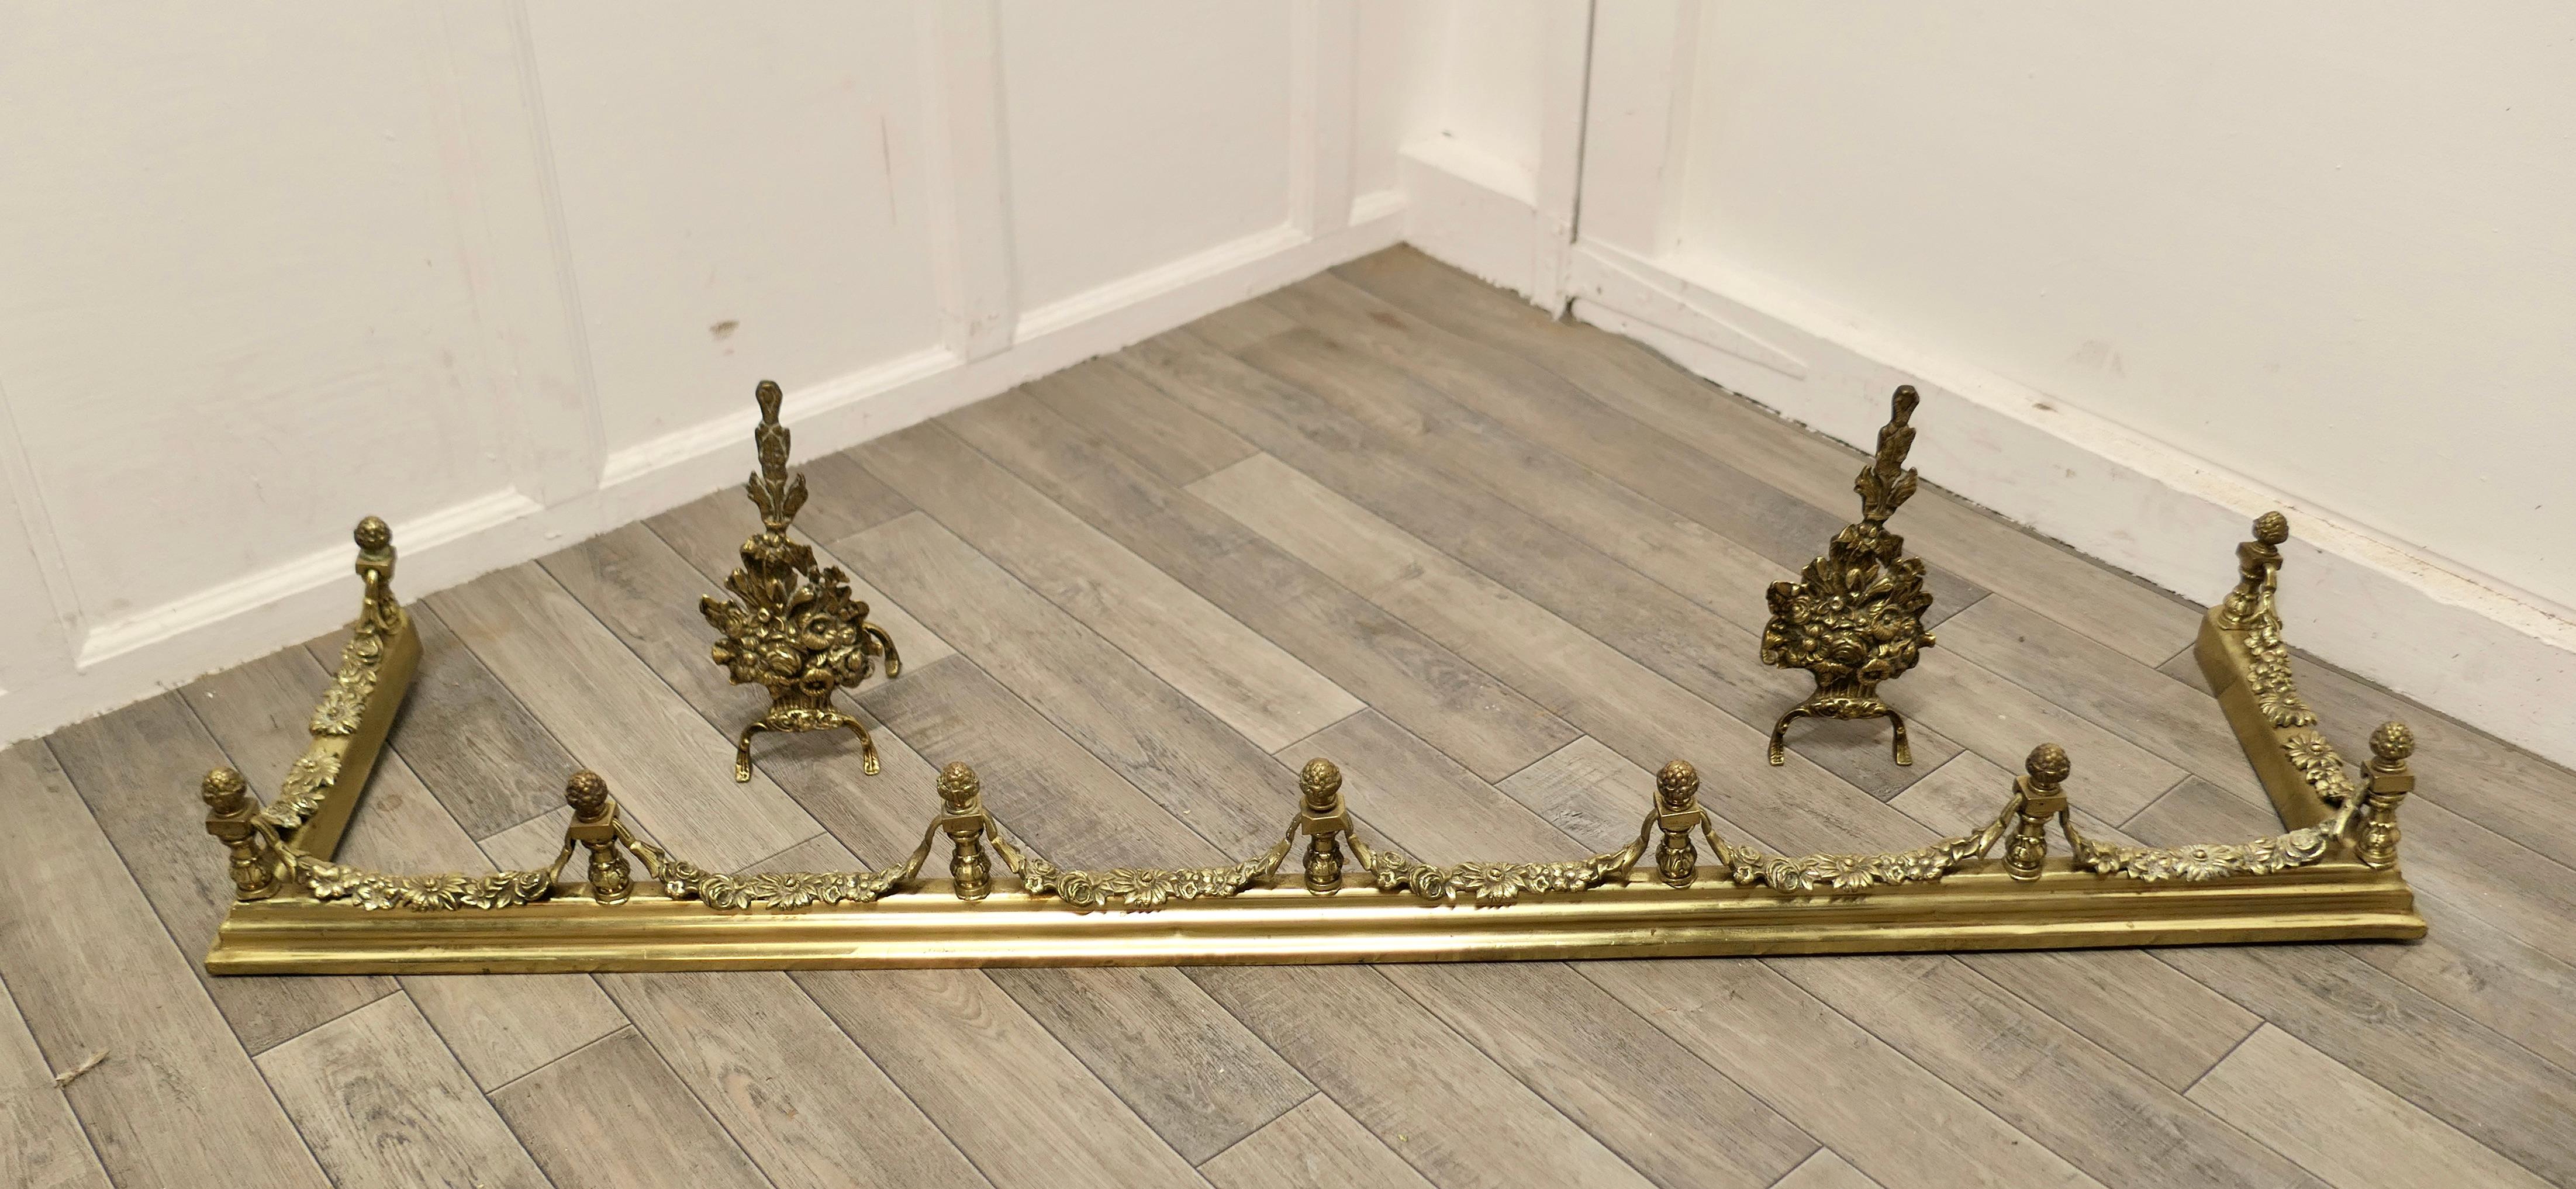 Superb quality and design 19th century heavy brass fender with andirons

This is a superb quality Set it has elaborate spindles and garlands of leafy swags matching the floral decoration on the andirons, this is one of the heaviest quality and